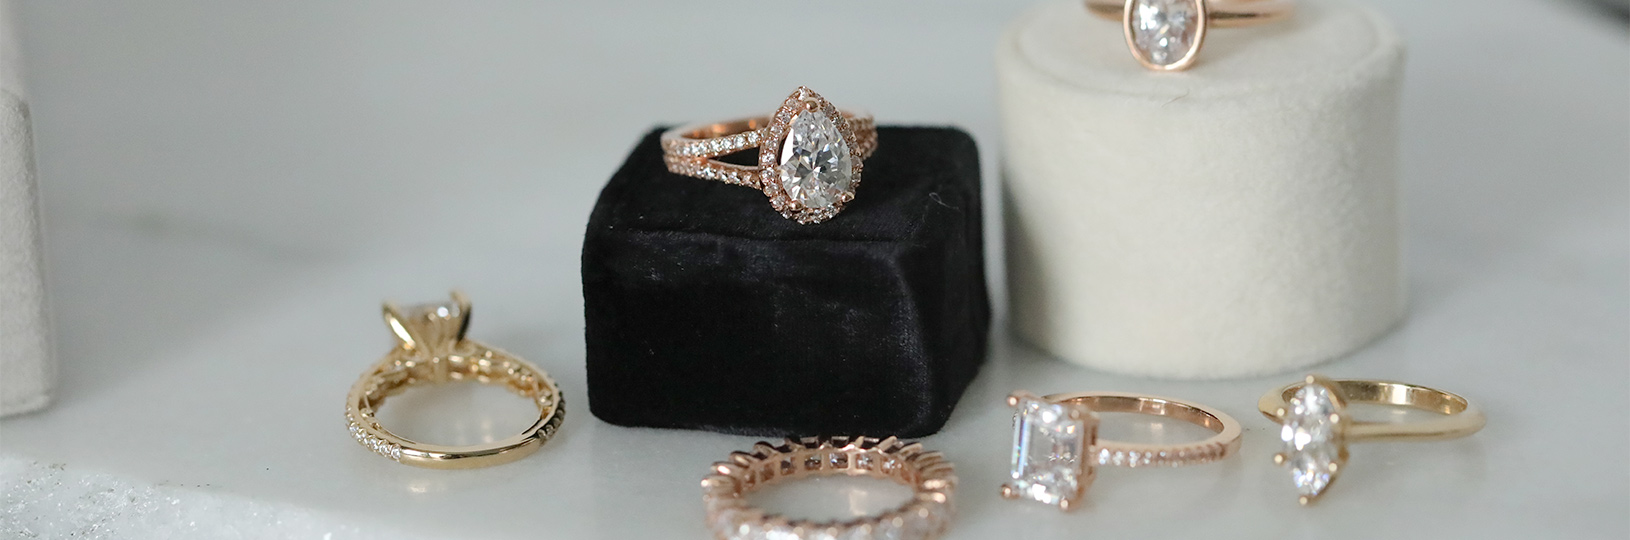 Variety of online engagement rings.